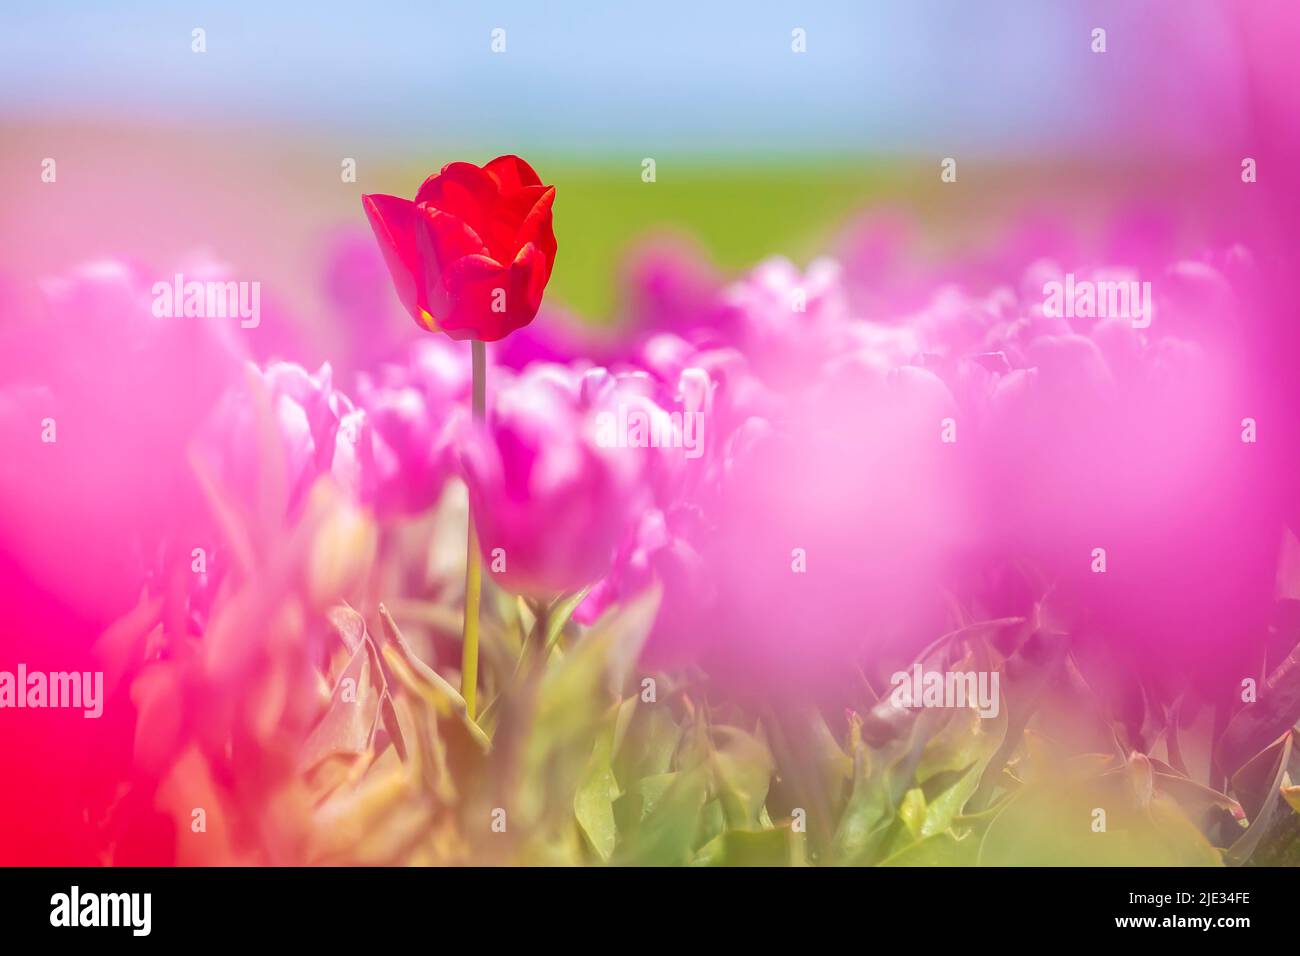 Blooming colorful Dutch pink purple tulip flower field under a blue sky. Zeeland, the Netherlands Stock Photo